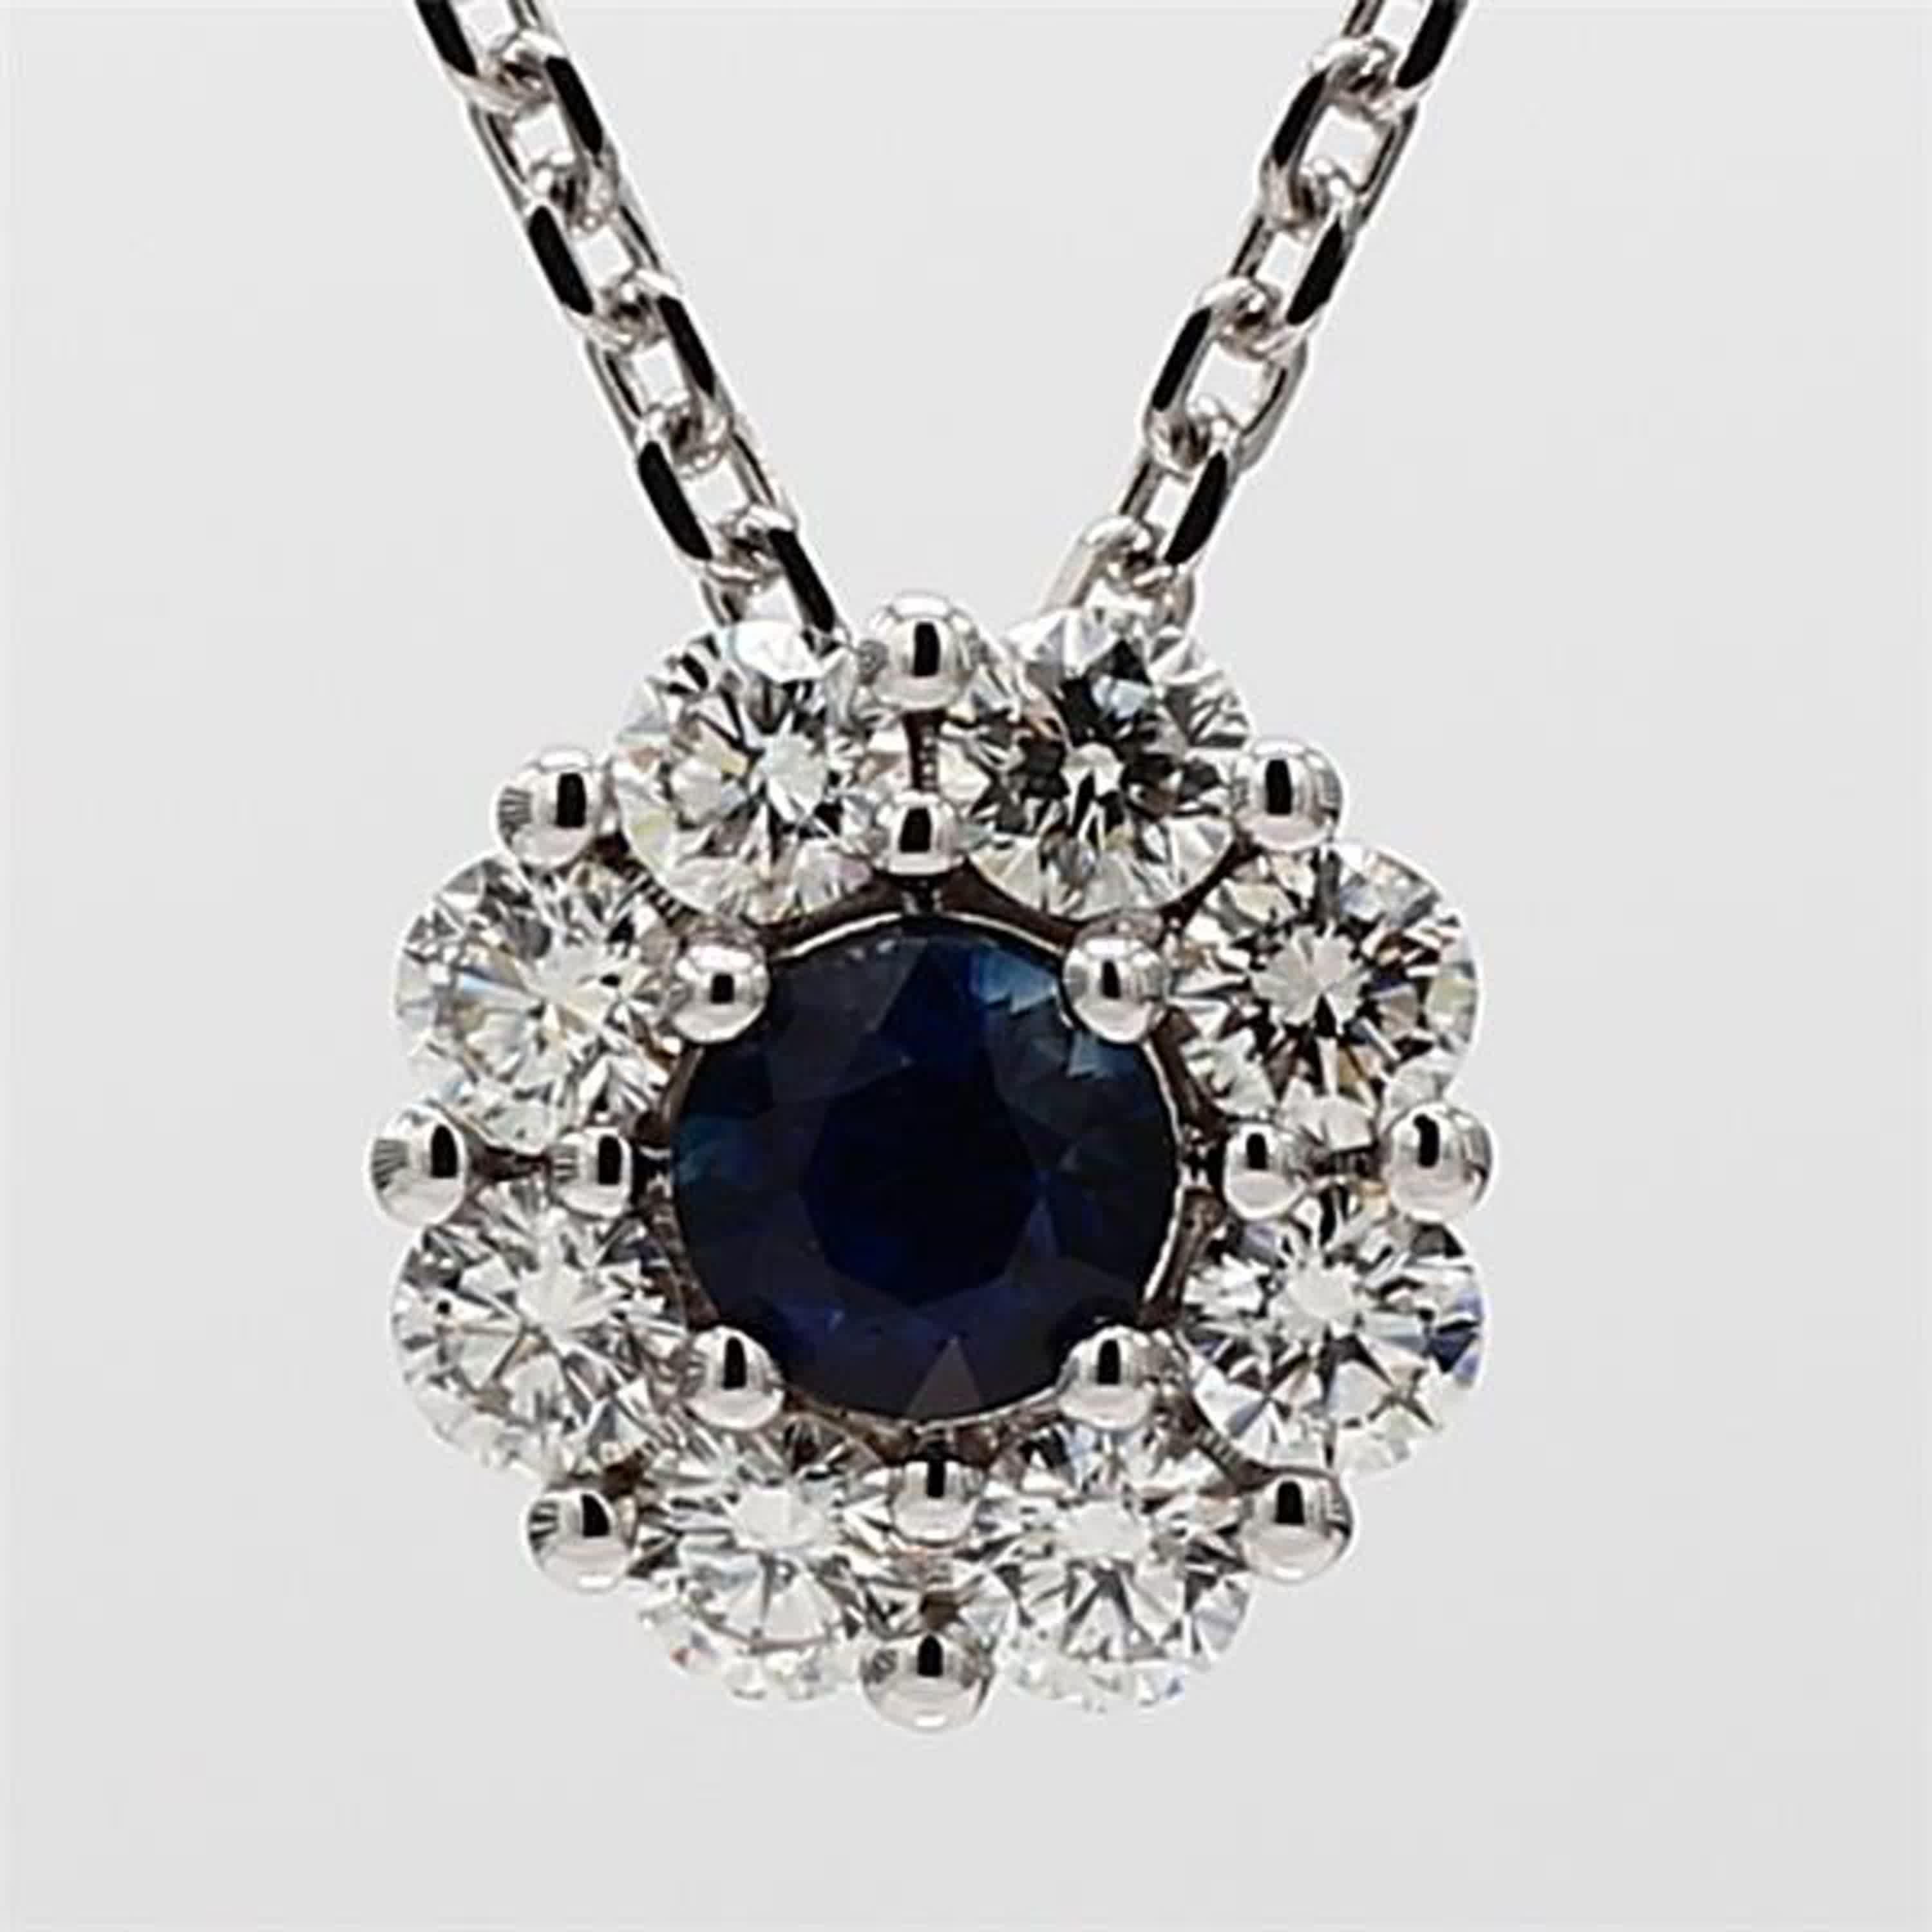 RareGemWorld's classic sapphire pendant. Mounted in a beautiful 14K White Gold setting with a natural round cut blue sapphire. The sapphire is surrounded by natural round white diamond melee in a beautiful single halo. This pendant is guaranteed to